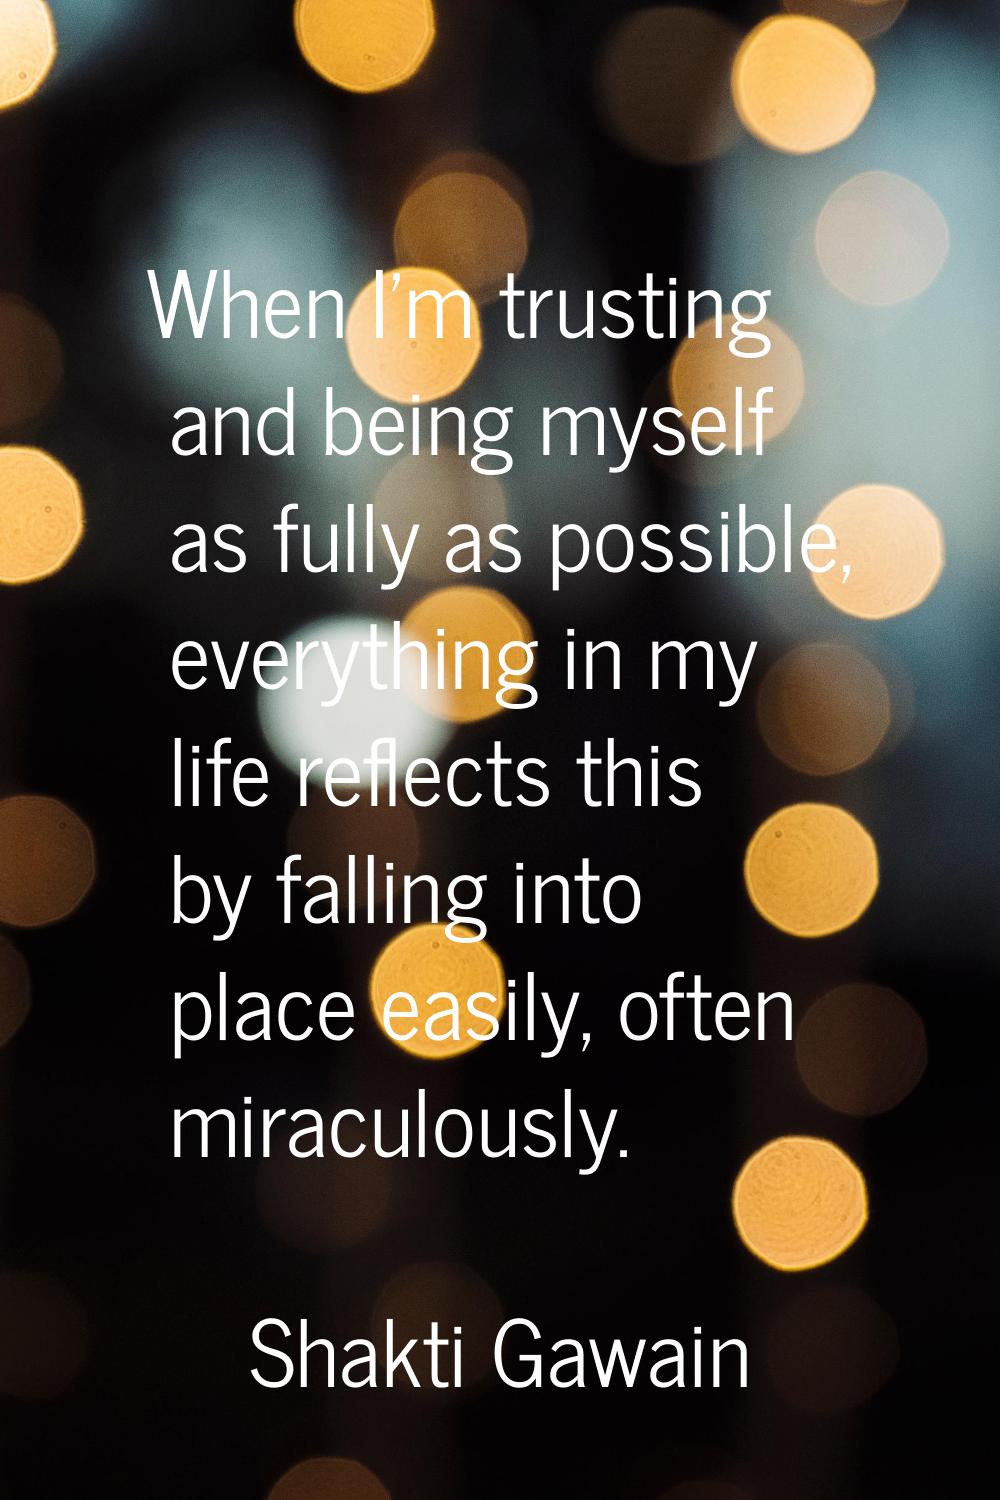 When I'm trusting and being myself as fully as possible, everything in my life reflects this by fal